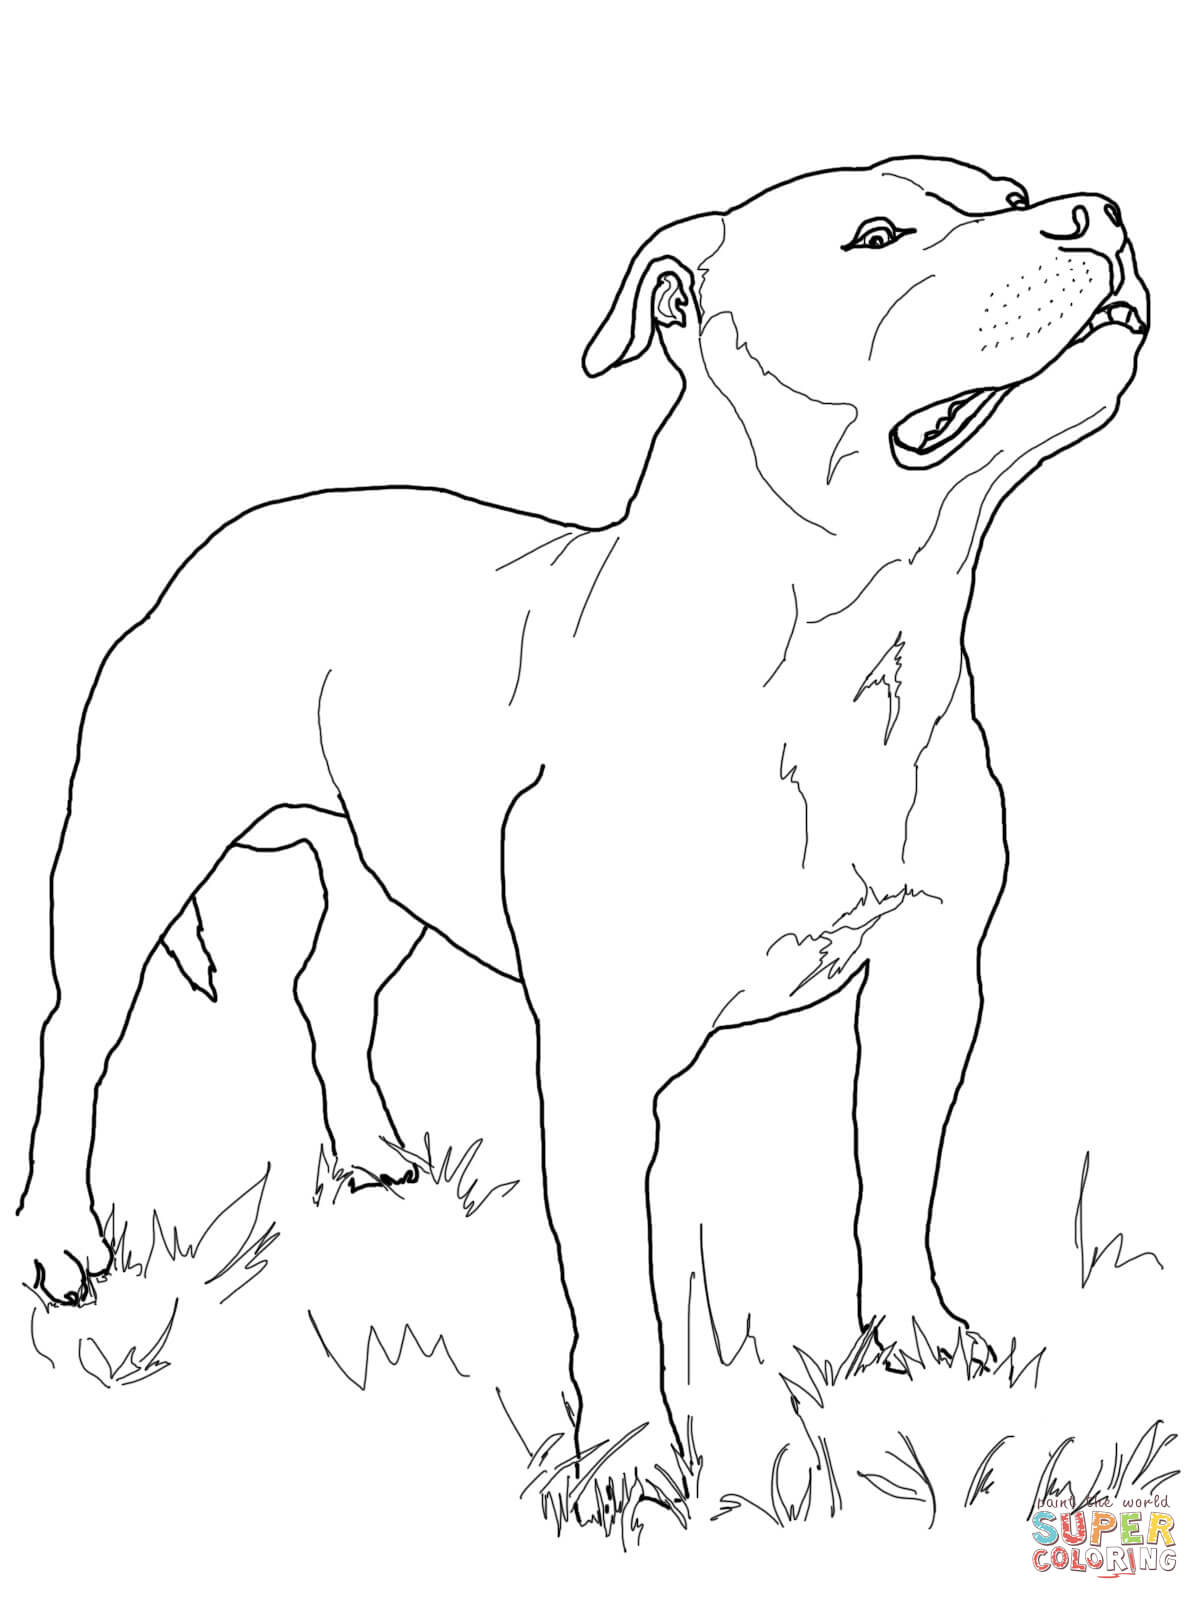 Staffordshire Bull Terrier Coloring Online. Bull Coloring Pages ...